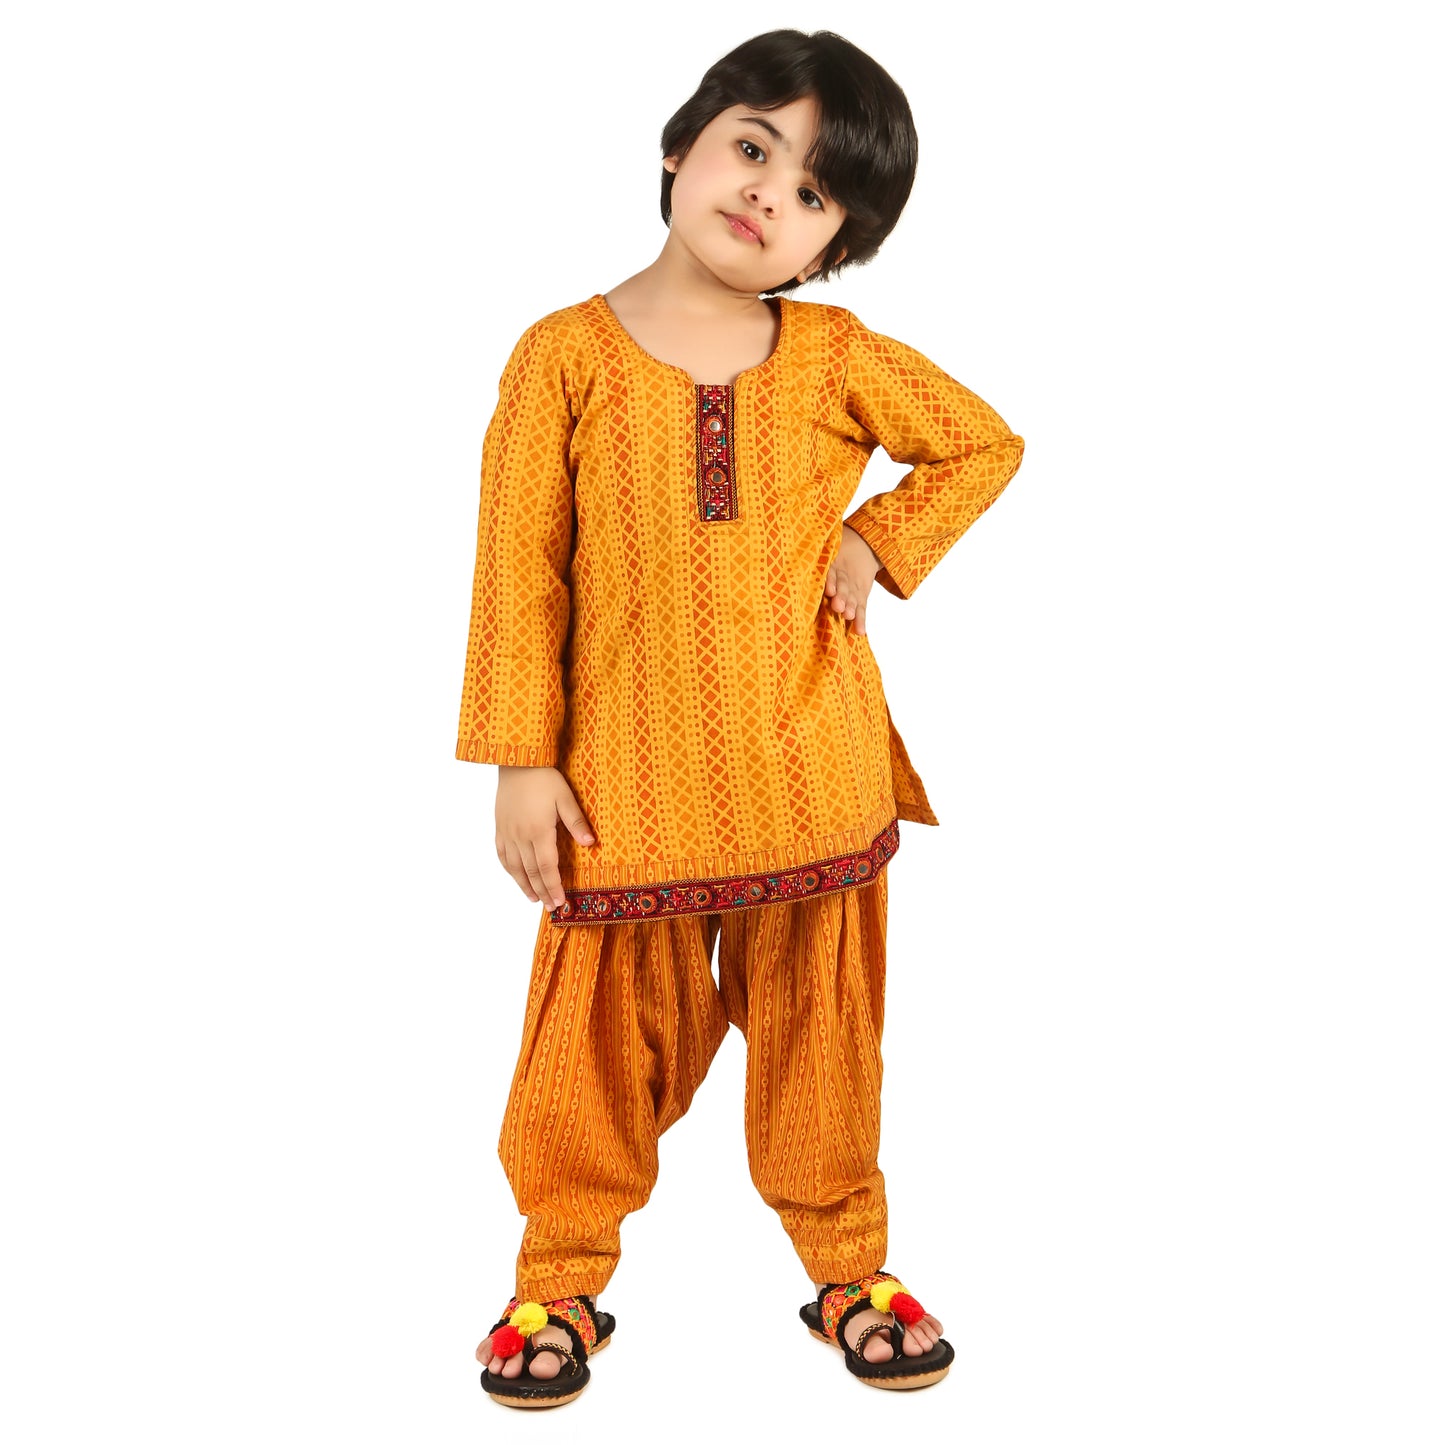 Mustard Yellow Salwar Suit for Girls- Ages 0-16Y - Block Print